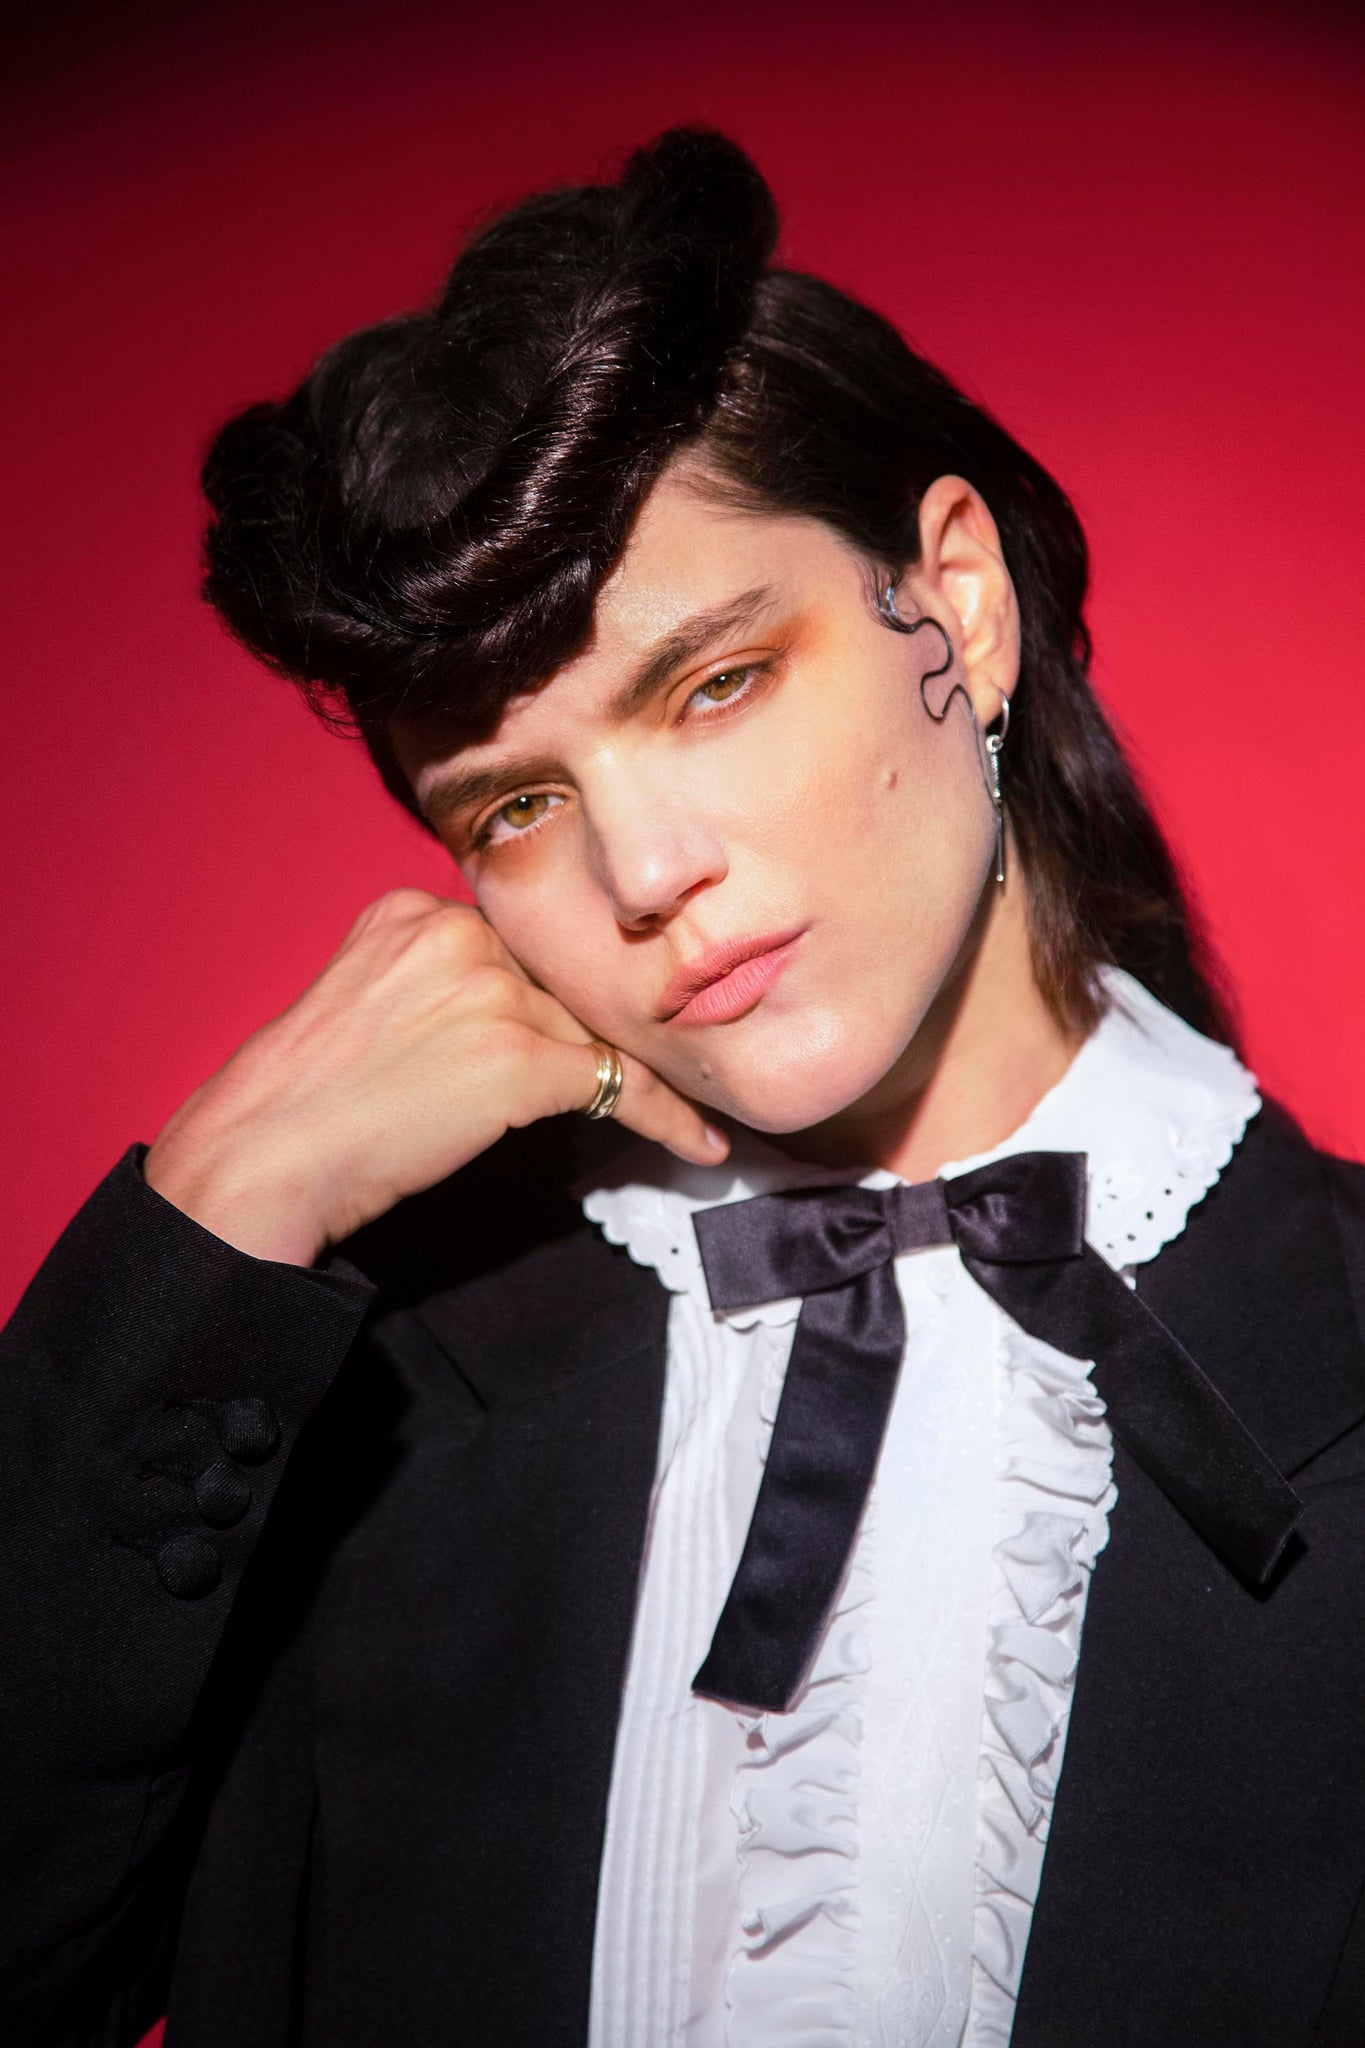 Soko, Teddy Boy. Hair and Makeup by Leticia Llesmin